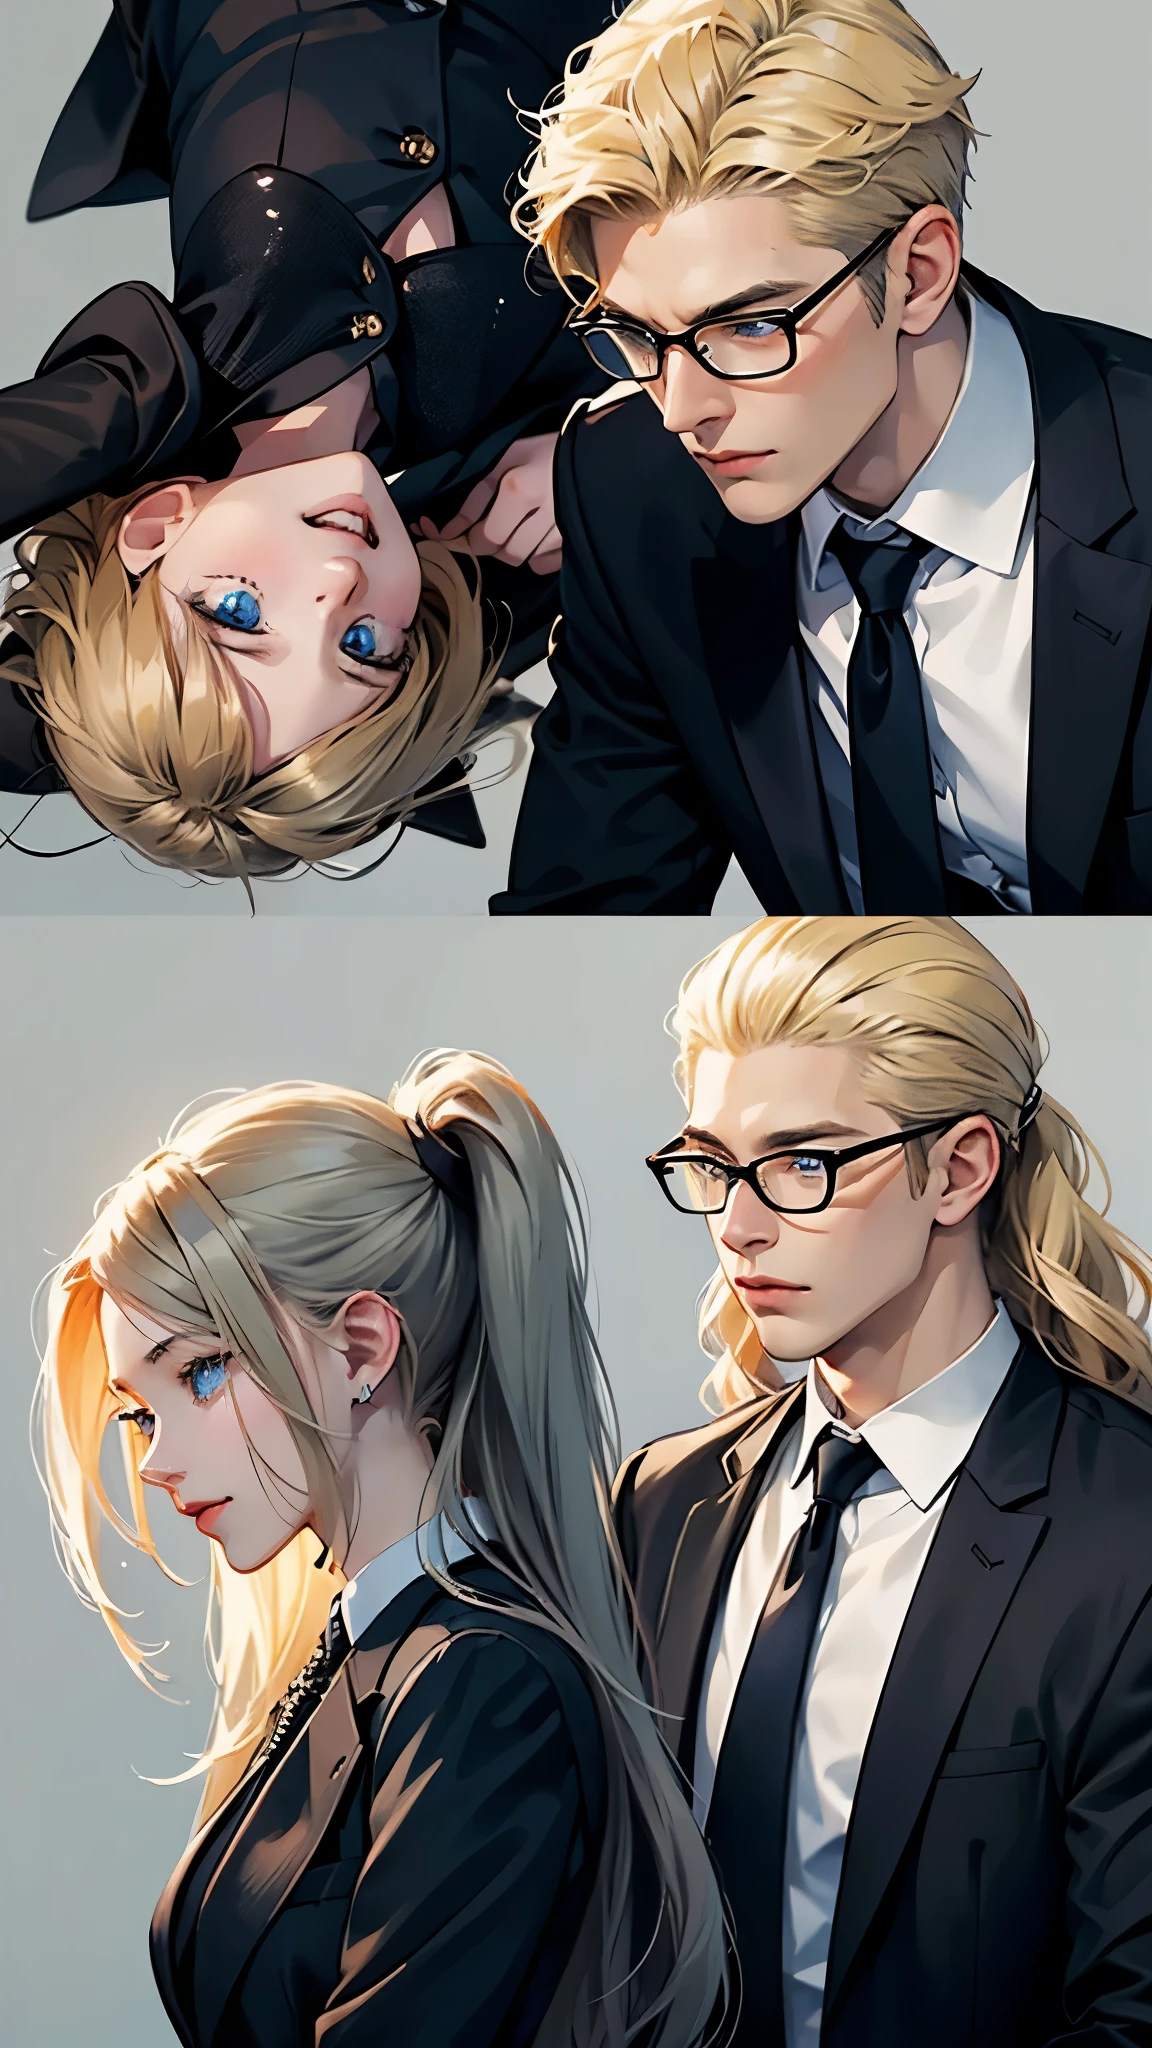 With anime style illustrations、A young man and woman couple appears。The man has blue eyes、Wearing a black suit jacket。The woman is blonde and wears glasses.、She&#39;s wearing soft pink clothes。The two of them pose intimately、The background has vibrant blue and pink tones that evoke a romantic atmosphere.。A woman grabs a man&#39;s jacket、It emphasizes the intimacy between the two。